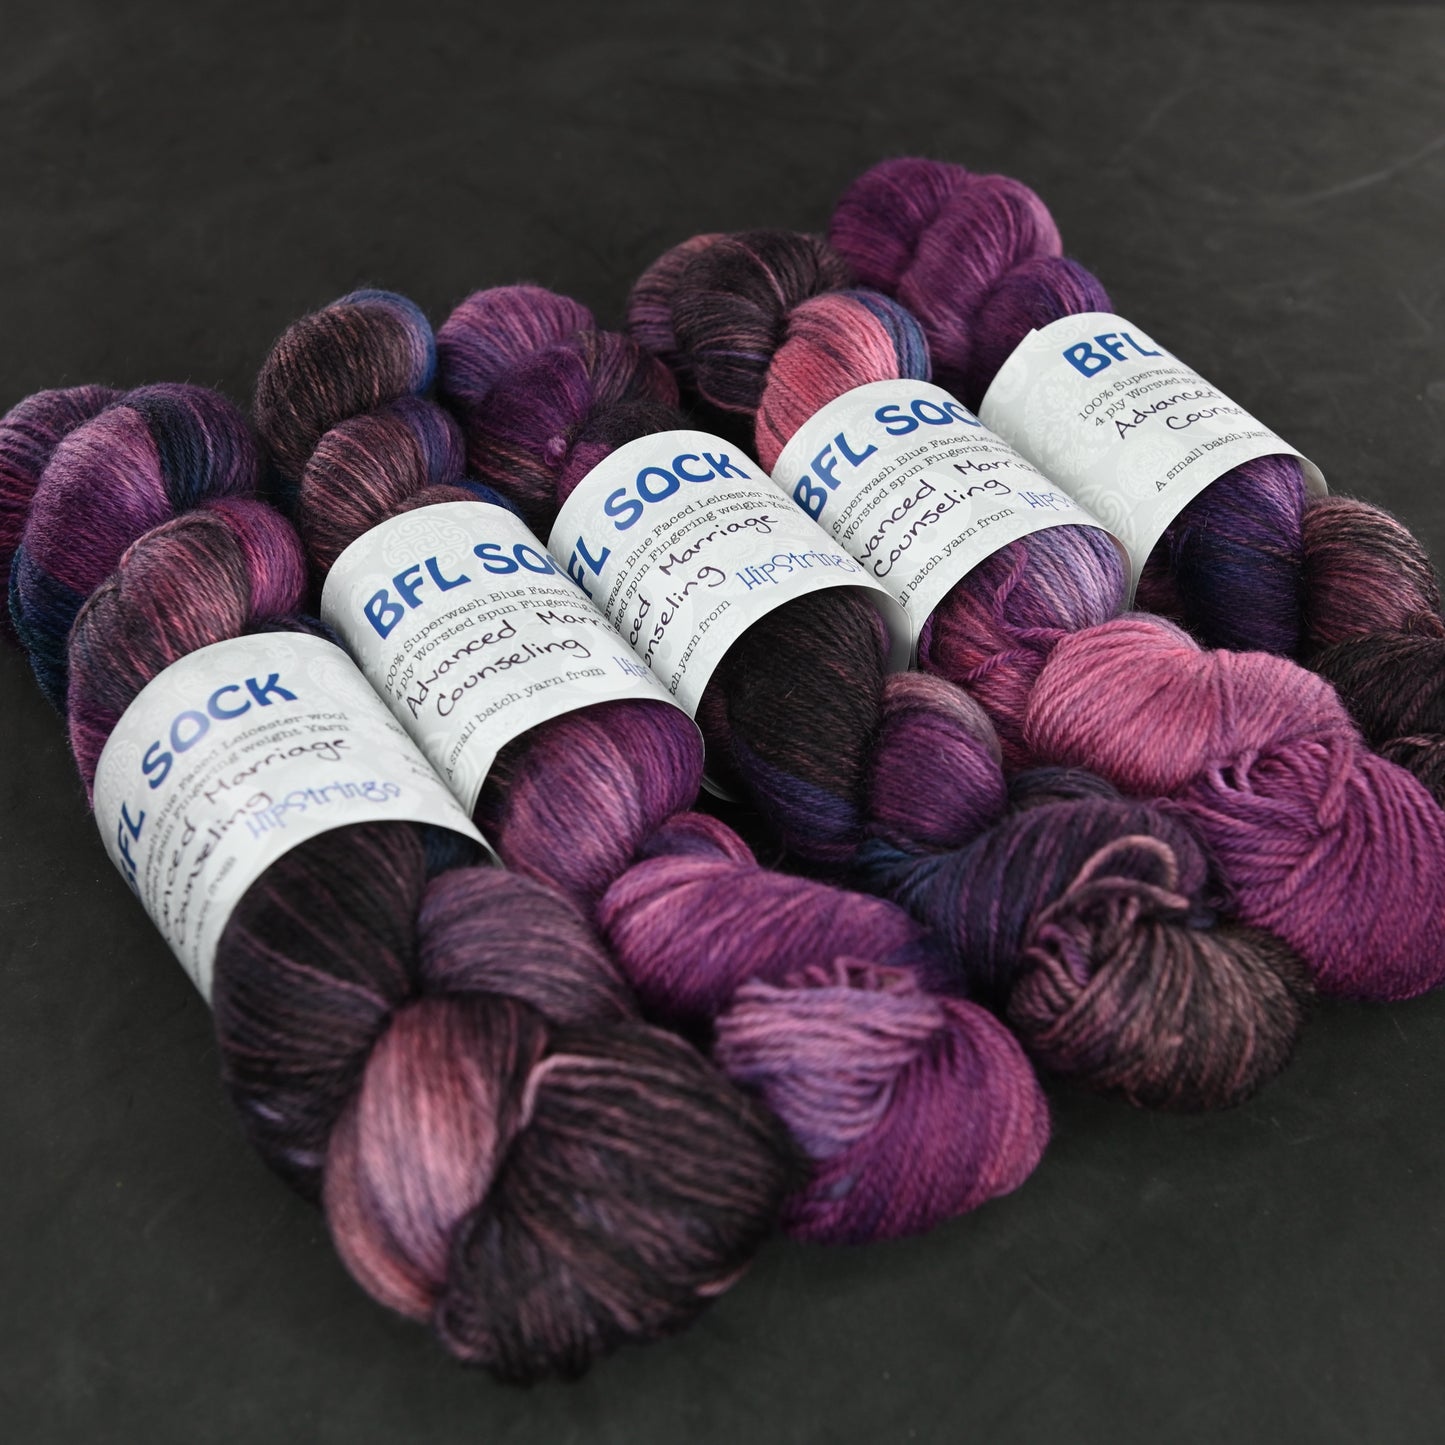 Advanced Marriage Counseling on Hand Dyed SW BFL Wool Sock Yarn - 450 yd